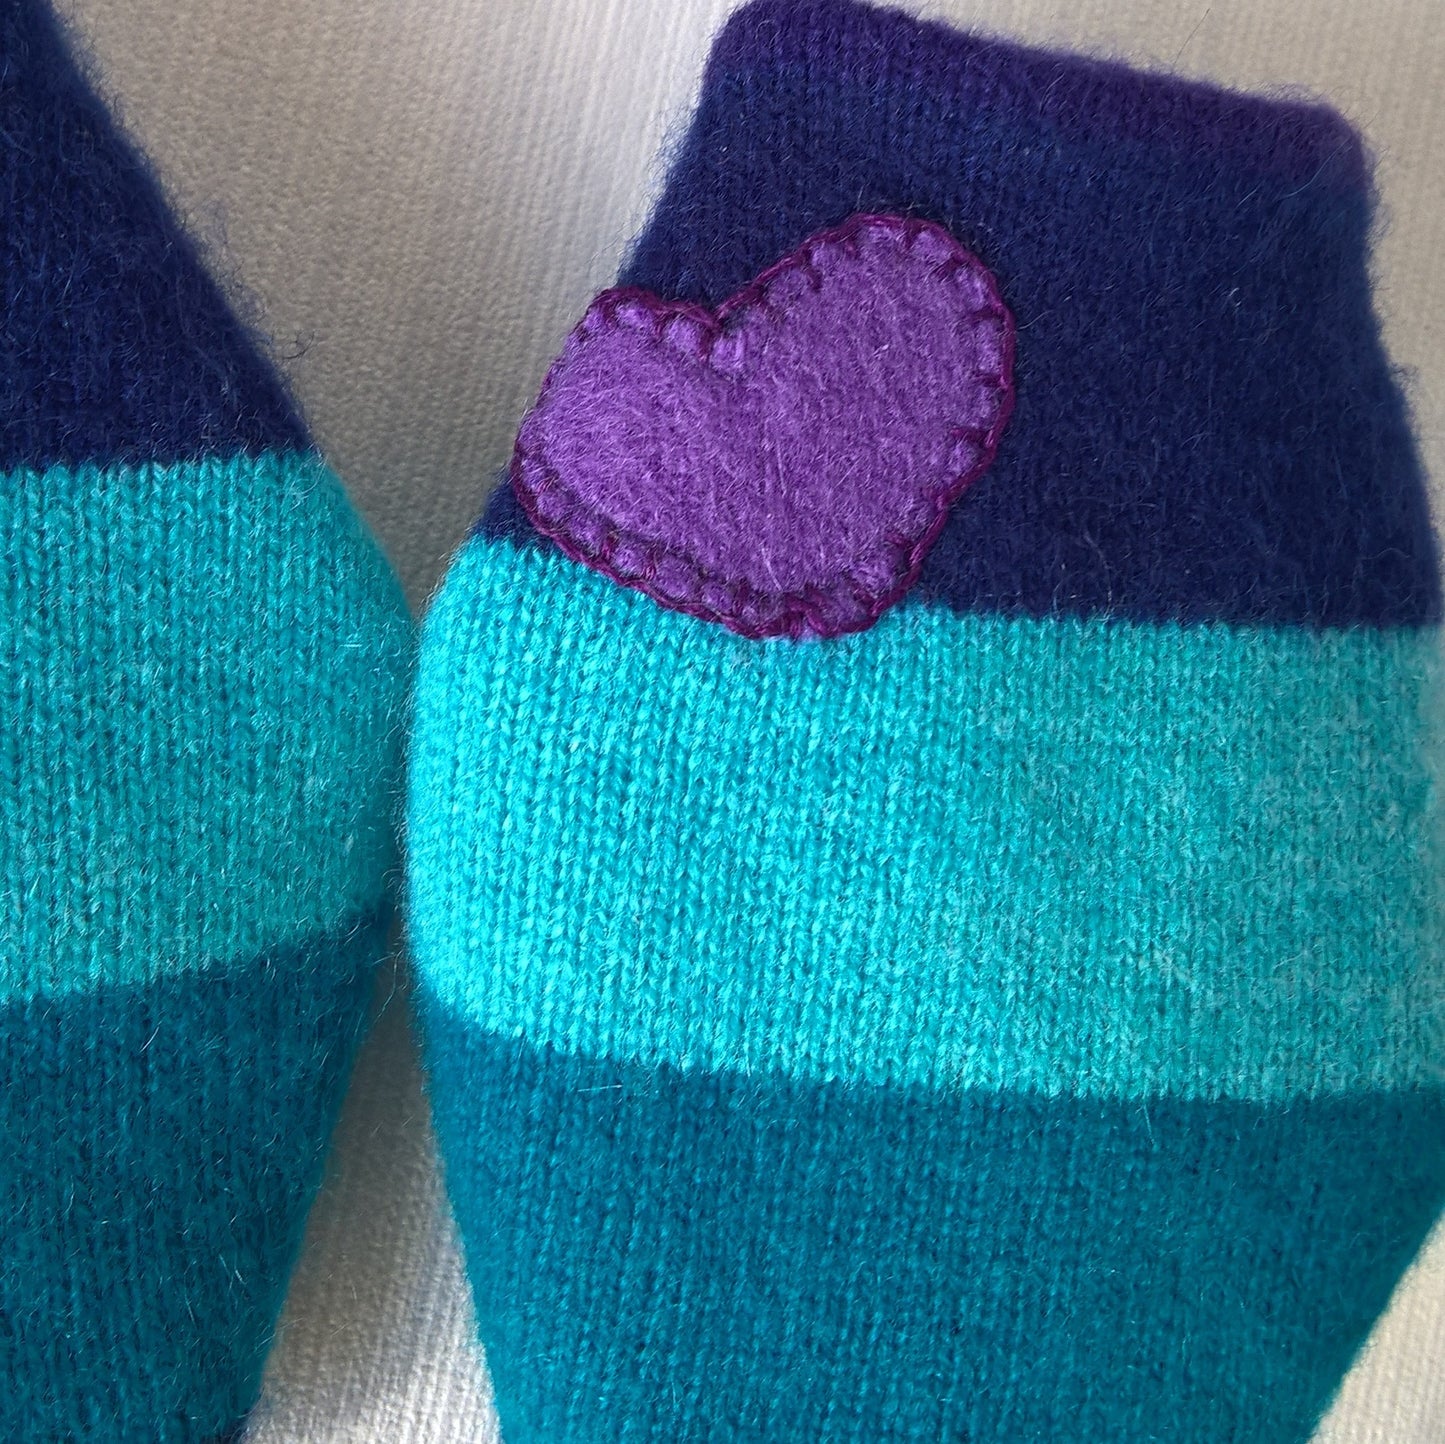 A purple cashmere heart has been appliqued to one wrist cuff